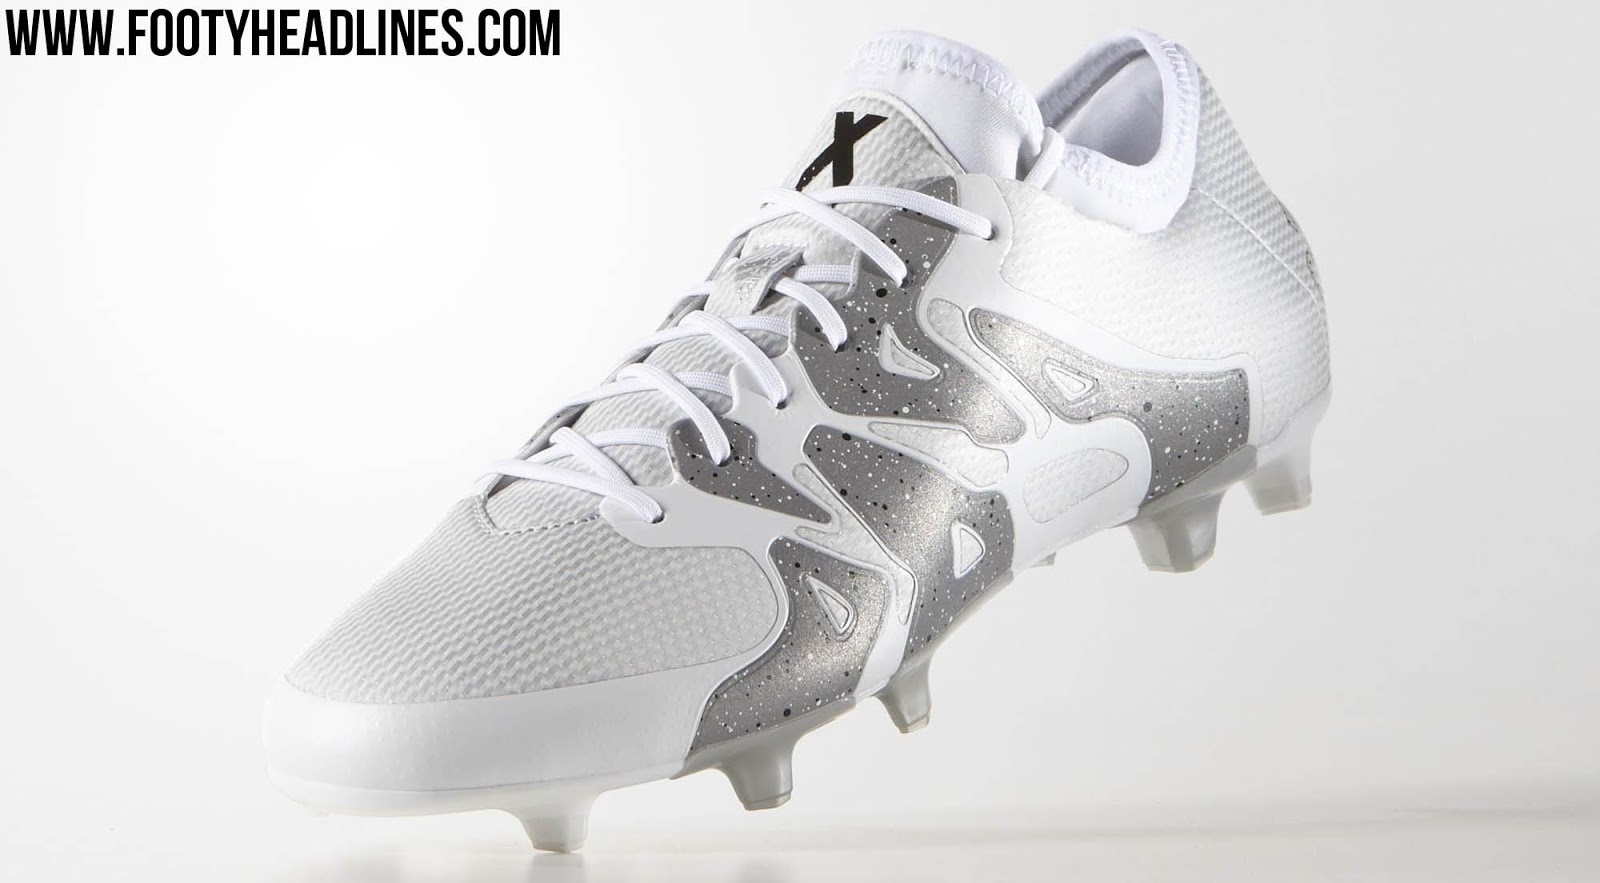 White Reflective Adidas X 15.1 2015-2016 Boots - Footy Headlines